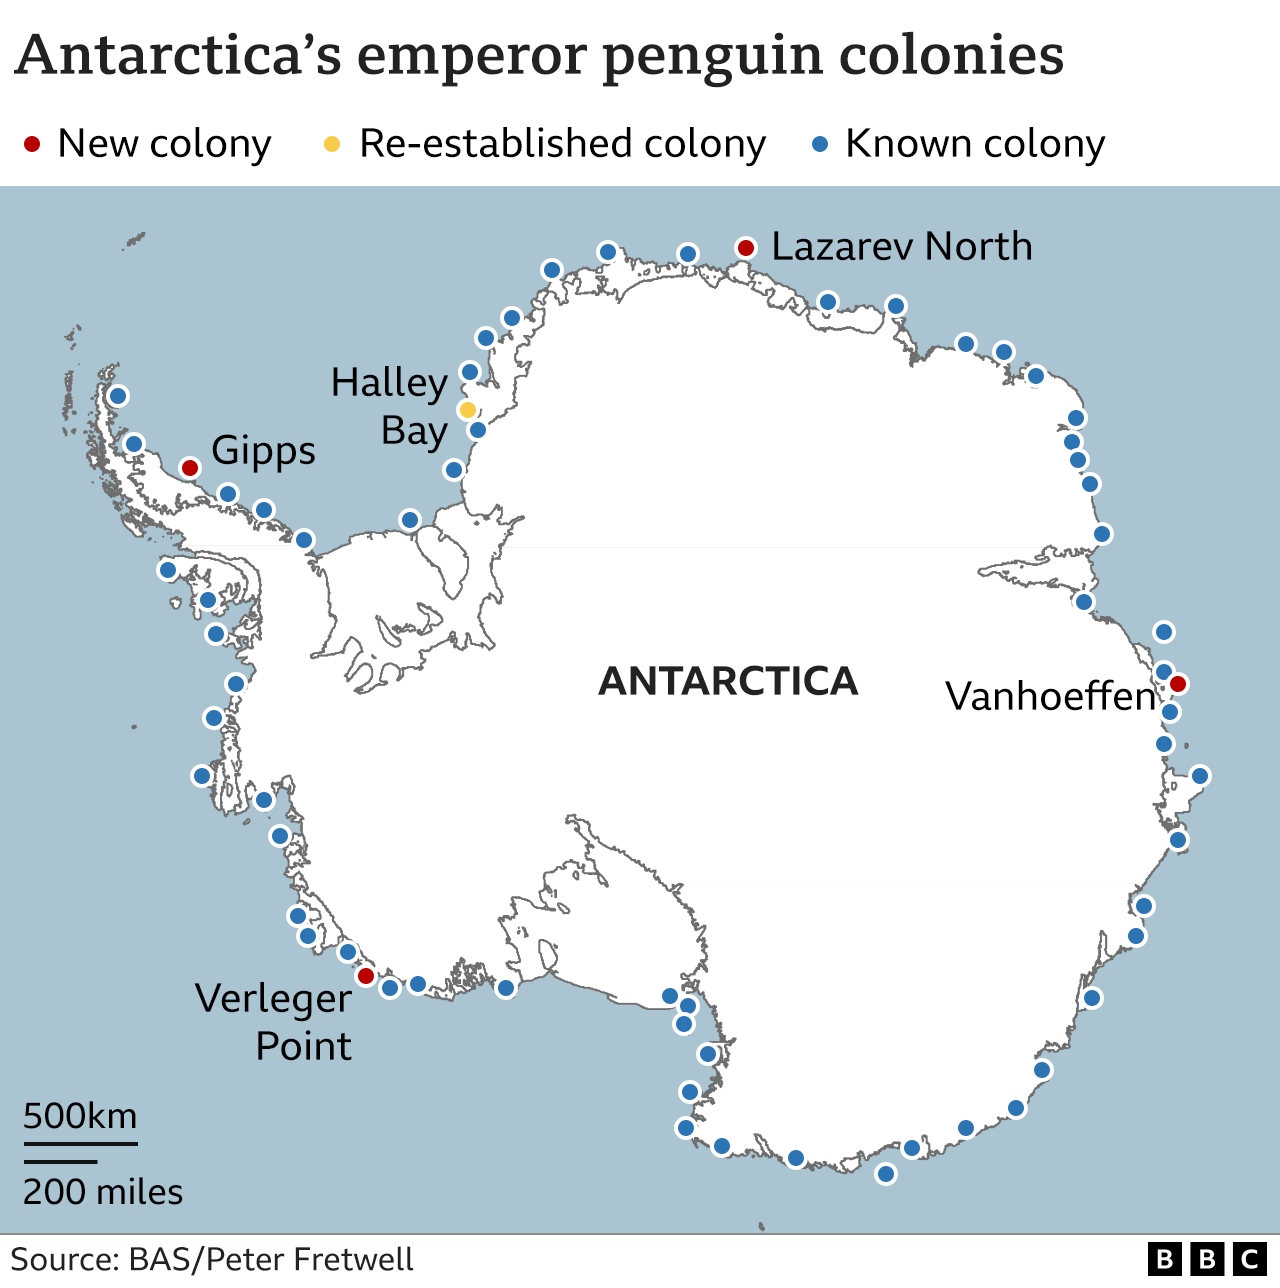 Position of penguin colonies